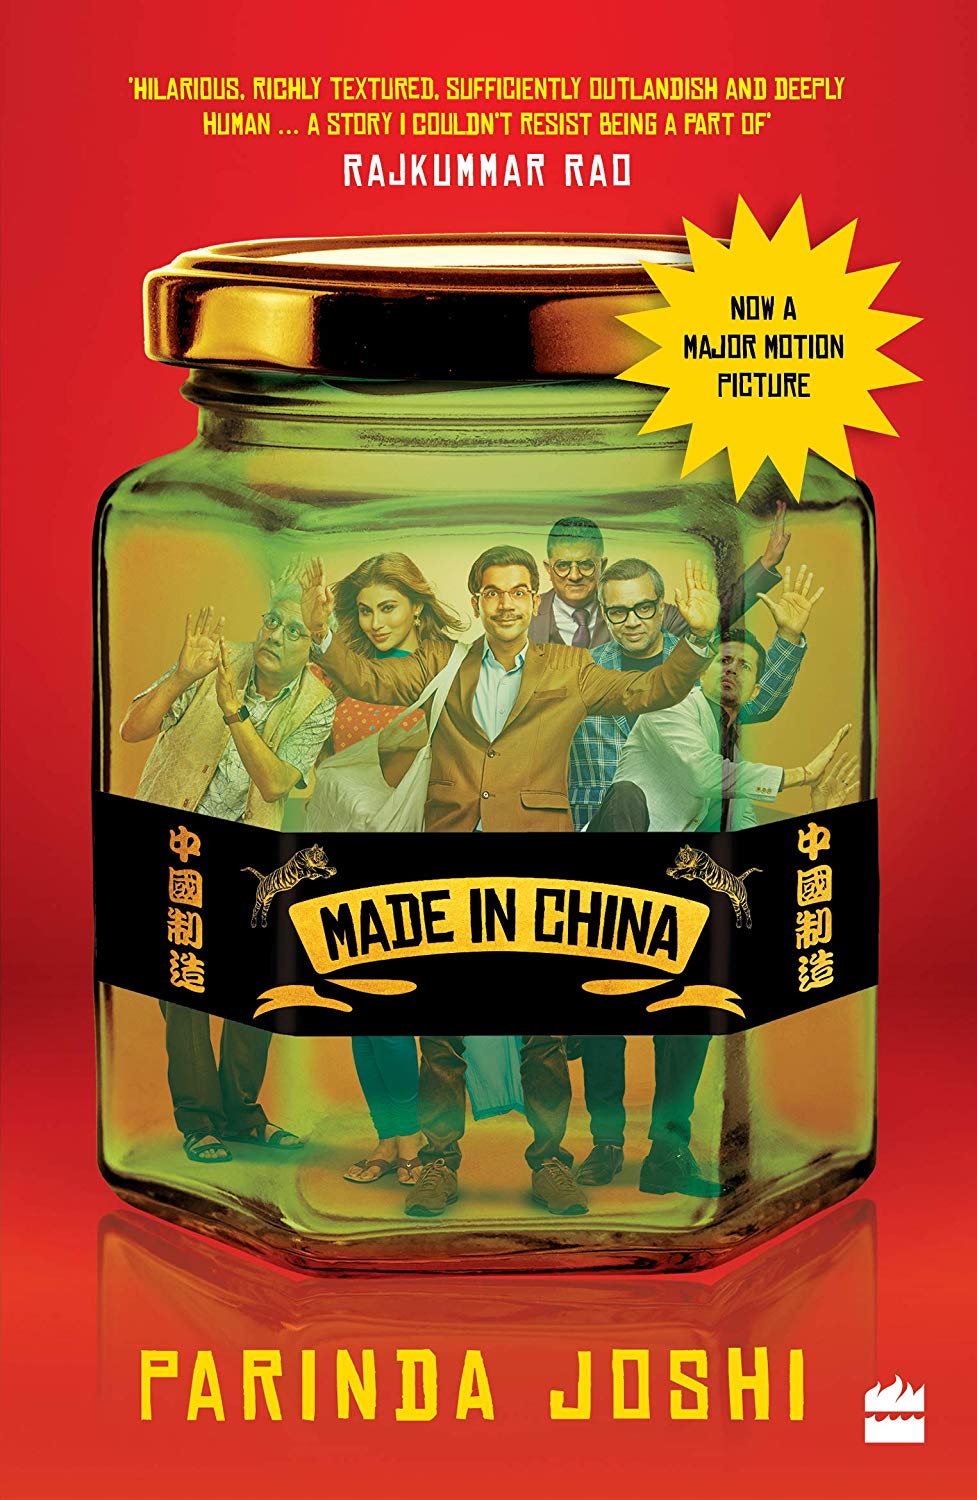 Parinda Joshi on "Made In China": 'While the movie is a drama, my book has a comical bent and is more of an internal and entrepreneurial journey'